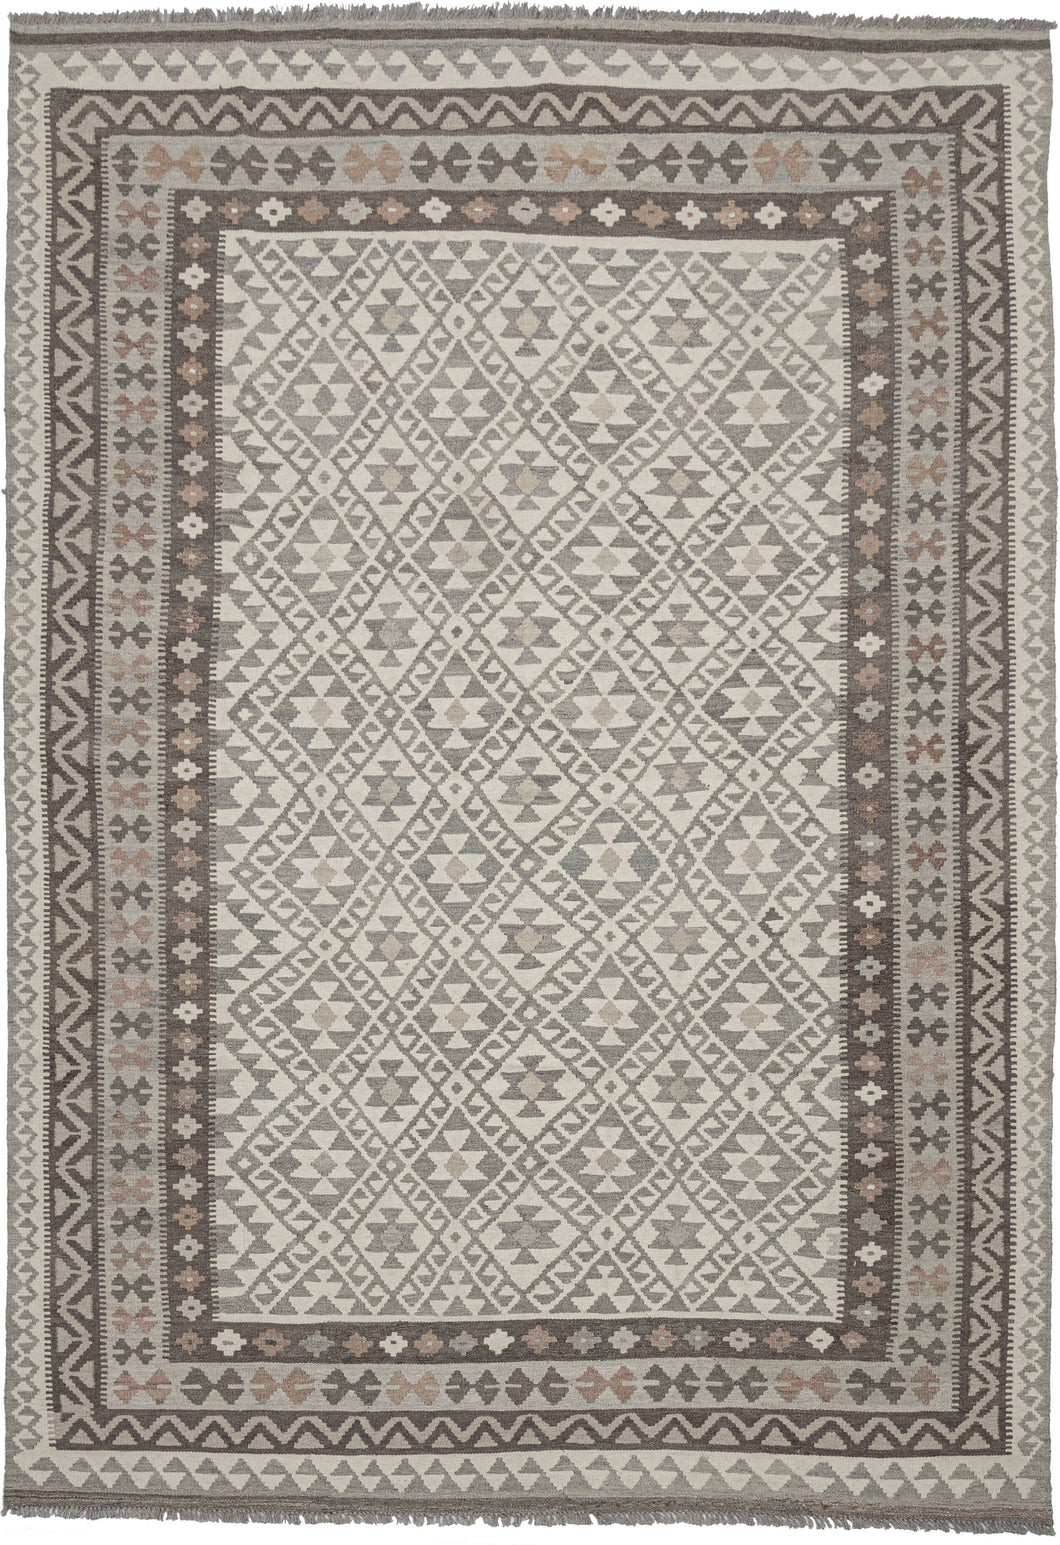 This Maimana kilim was woven in Afghanistan during the 21st Century.  It features classic Maimana patterning of stepped diamonds but in a neutral palette of soft browns, gray, and ivory. A versatile piece with a calming presence.  Alternate spellings of Maimana include but are not limited to: Maymane, Maymana, Maimane.  